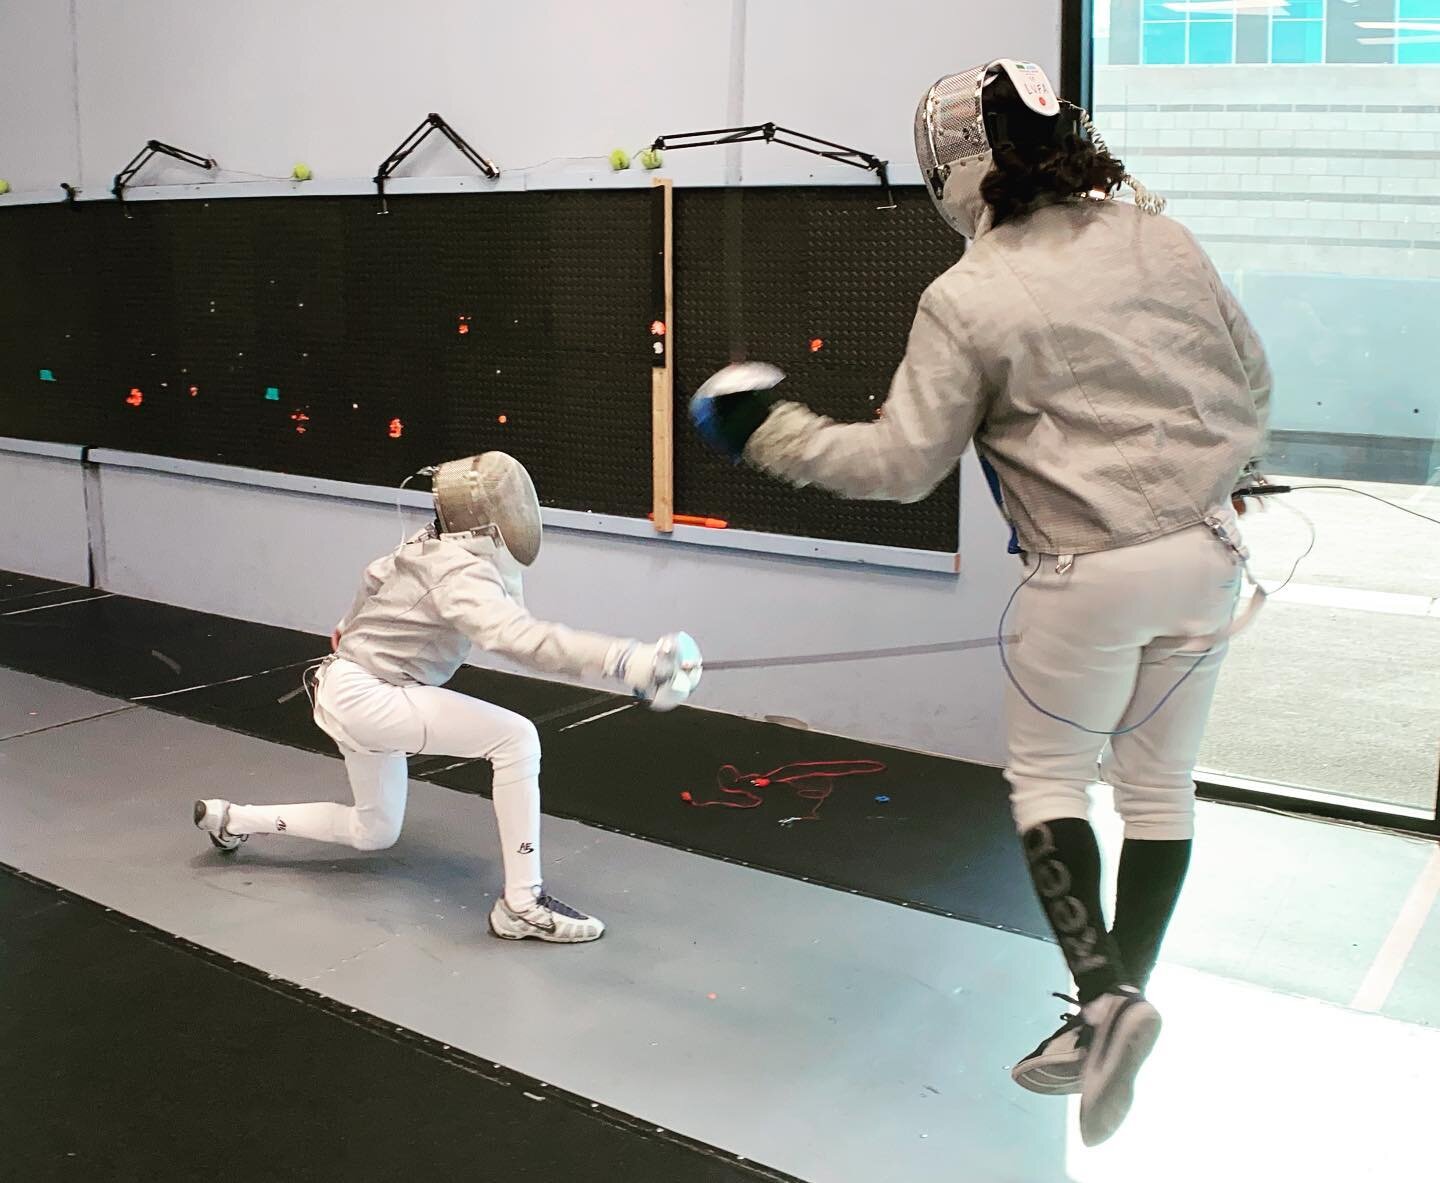 The tip of the saber is the second fasting moving object at the Olympics (only the marksman&rsquo;s bullet is faster). We offer the only competitive saber fencing program in Las Vegas, come experience the speed first hand. ⚡️🤺 #fencing #fitness #car